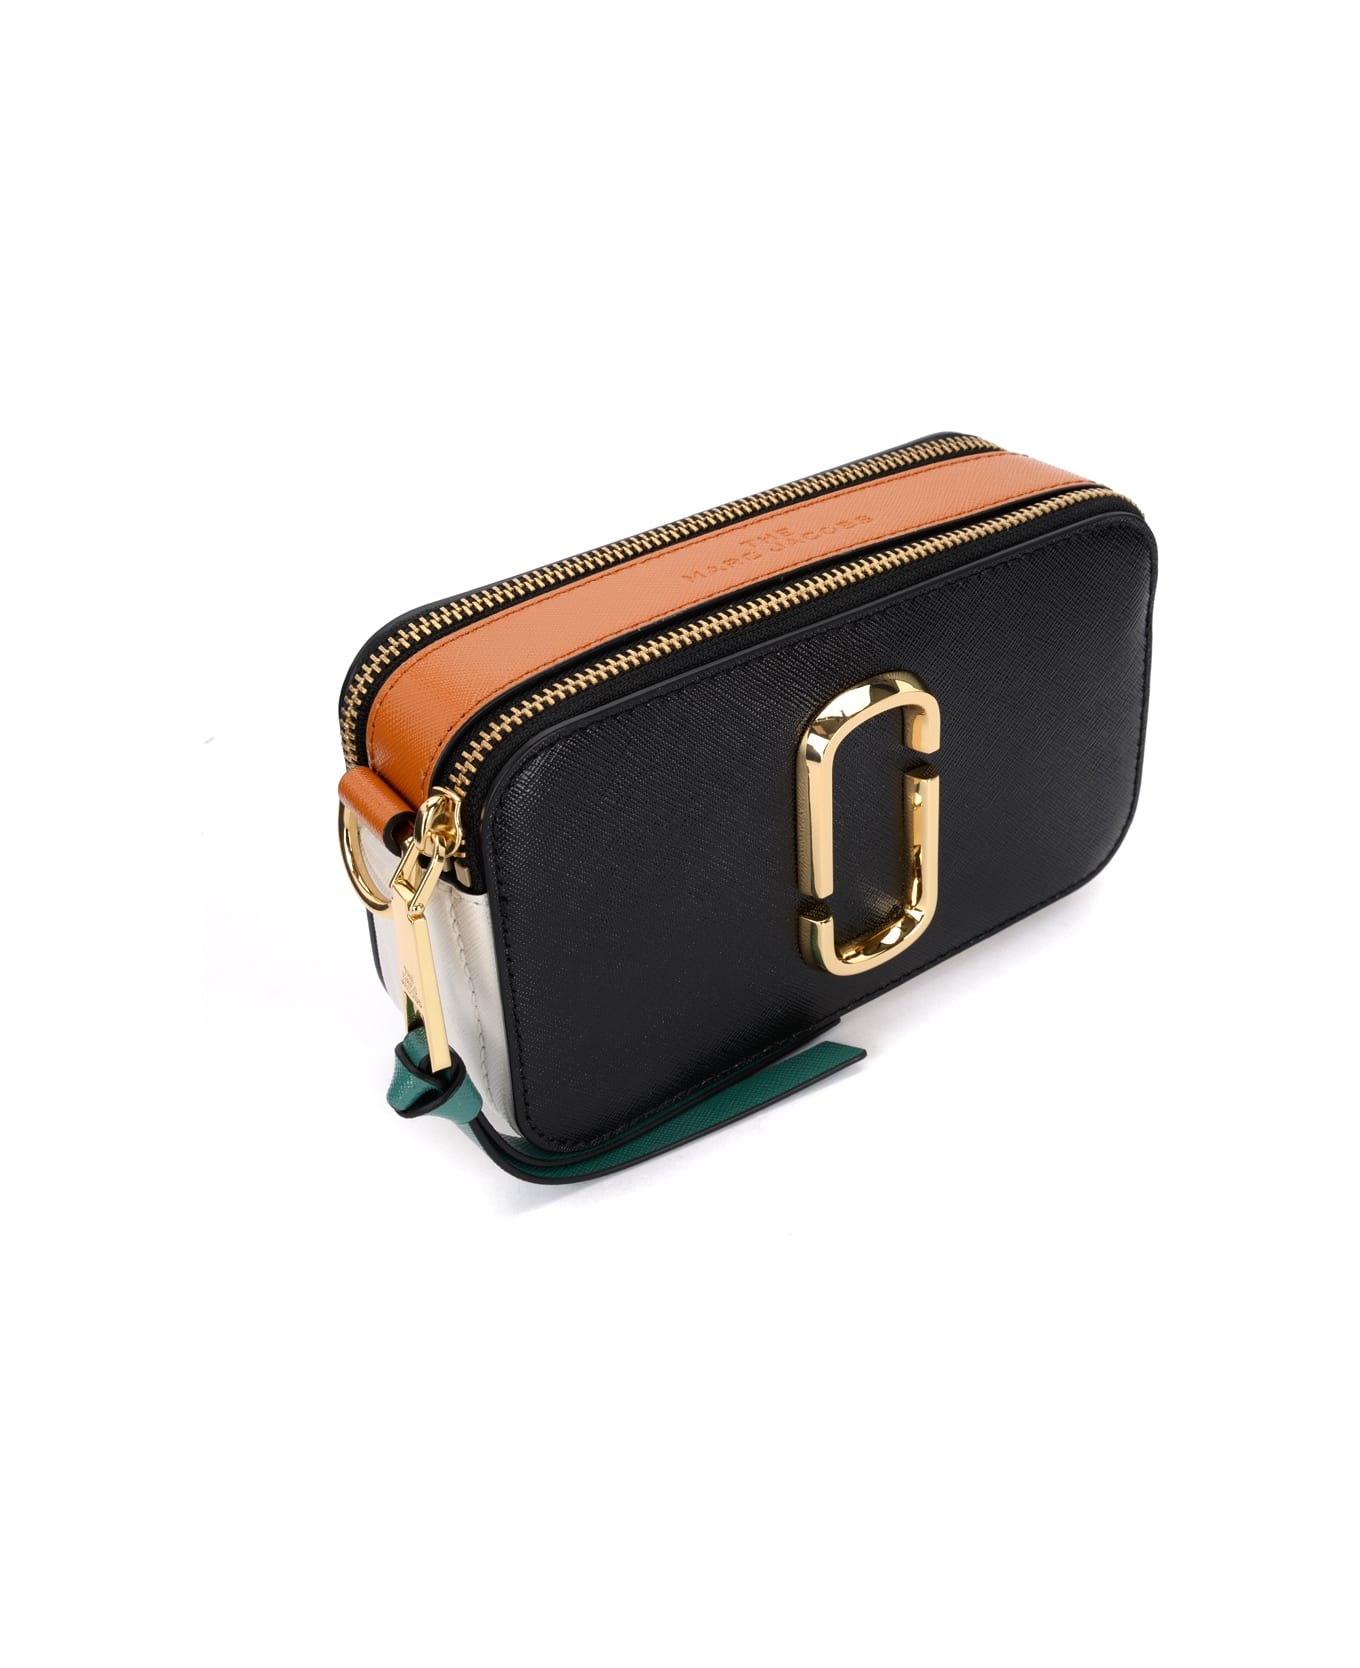 The Snapshot Leather Camera Bag in Orange - Marc Jacobs